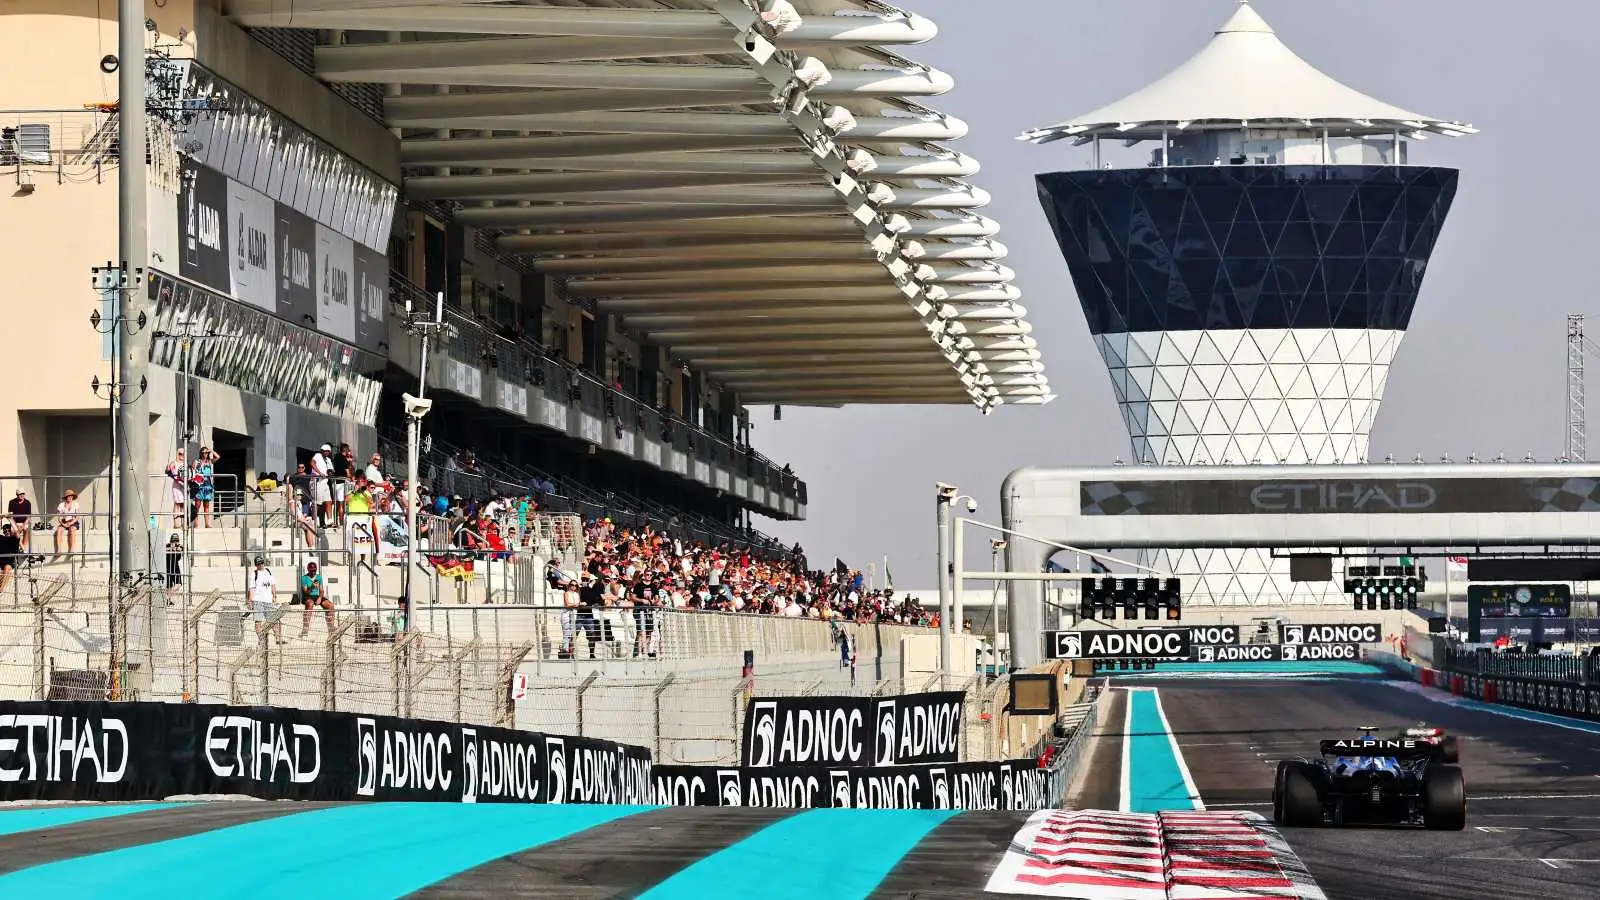 Fans watching the track action. Abu Dhabi, November 2022.